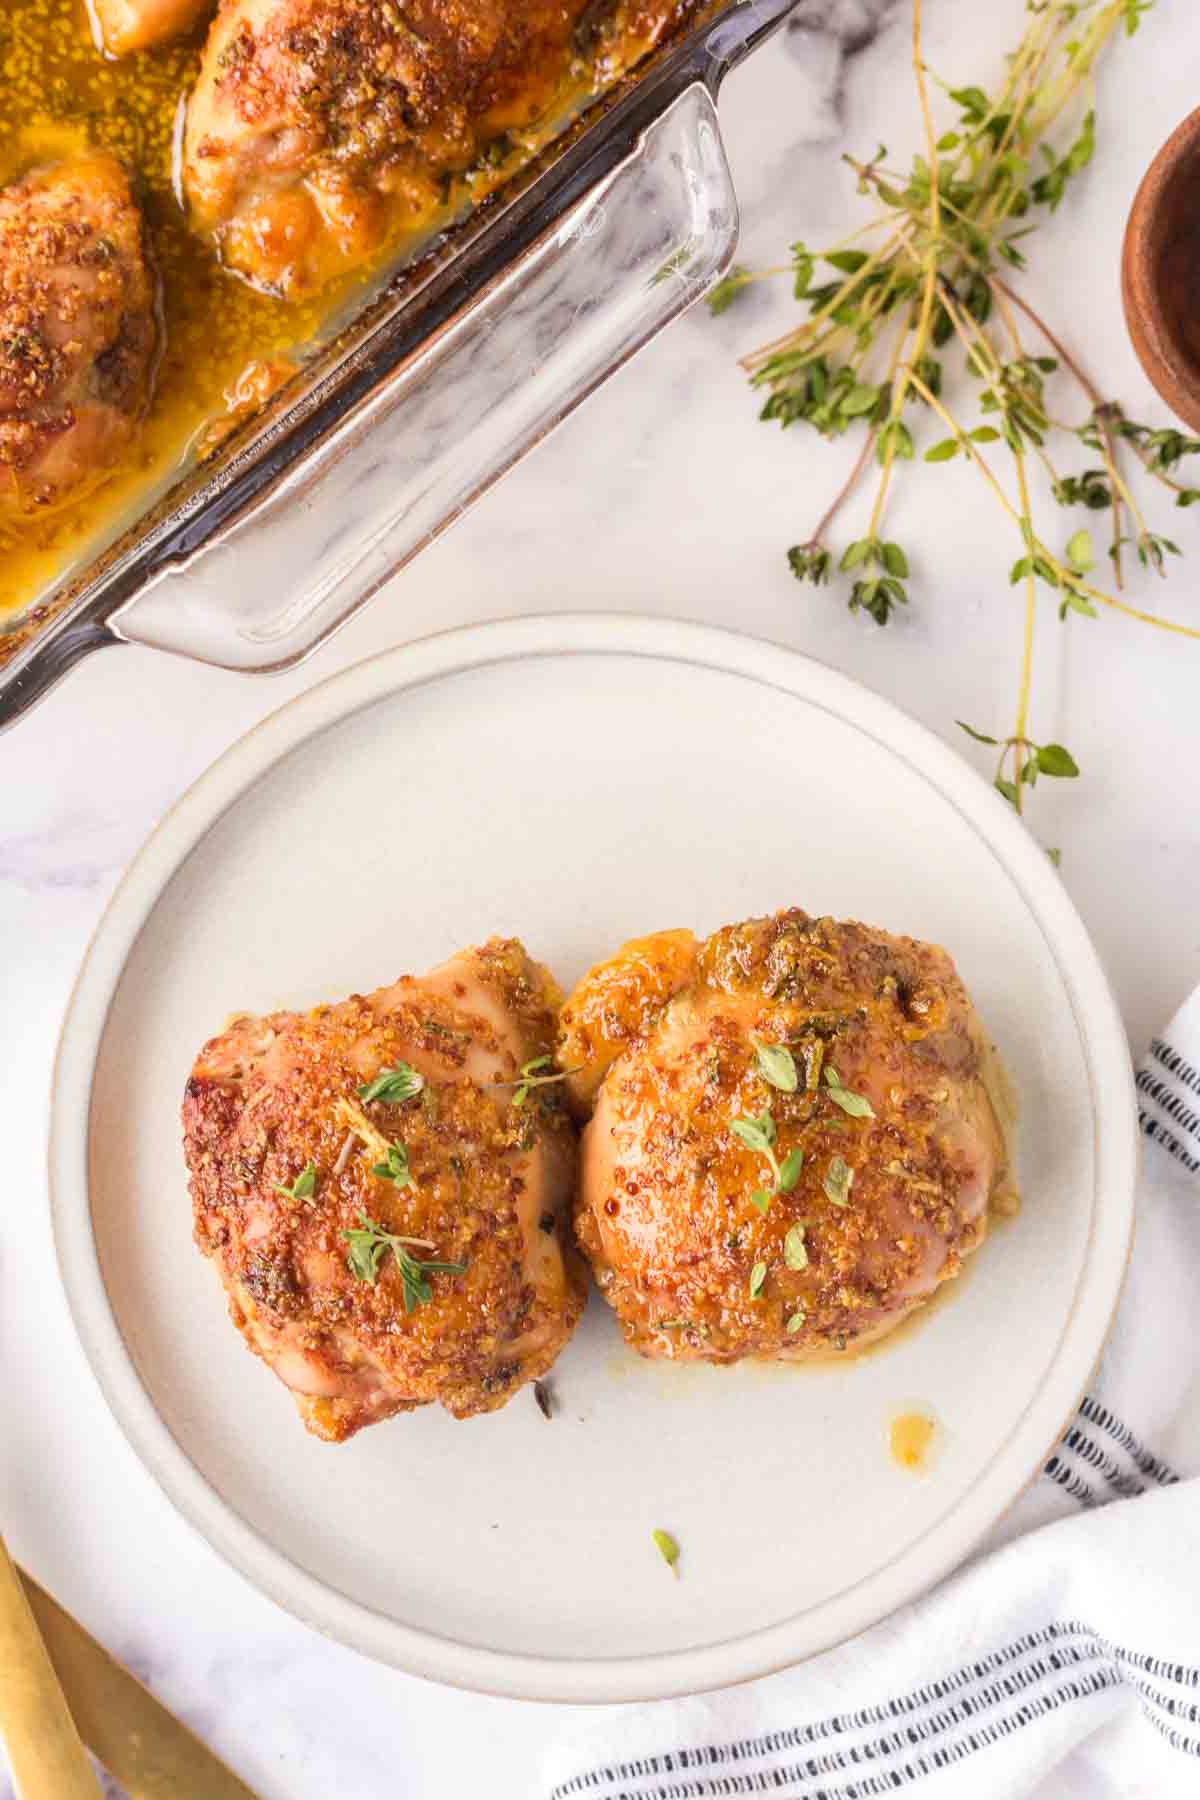 top view of baked and seasoned mustard chicken recipe on a plate